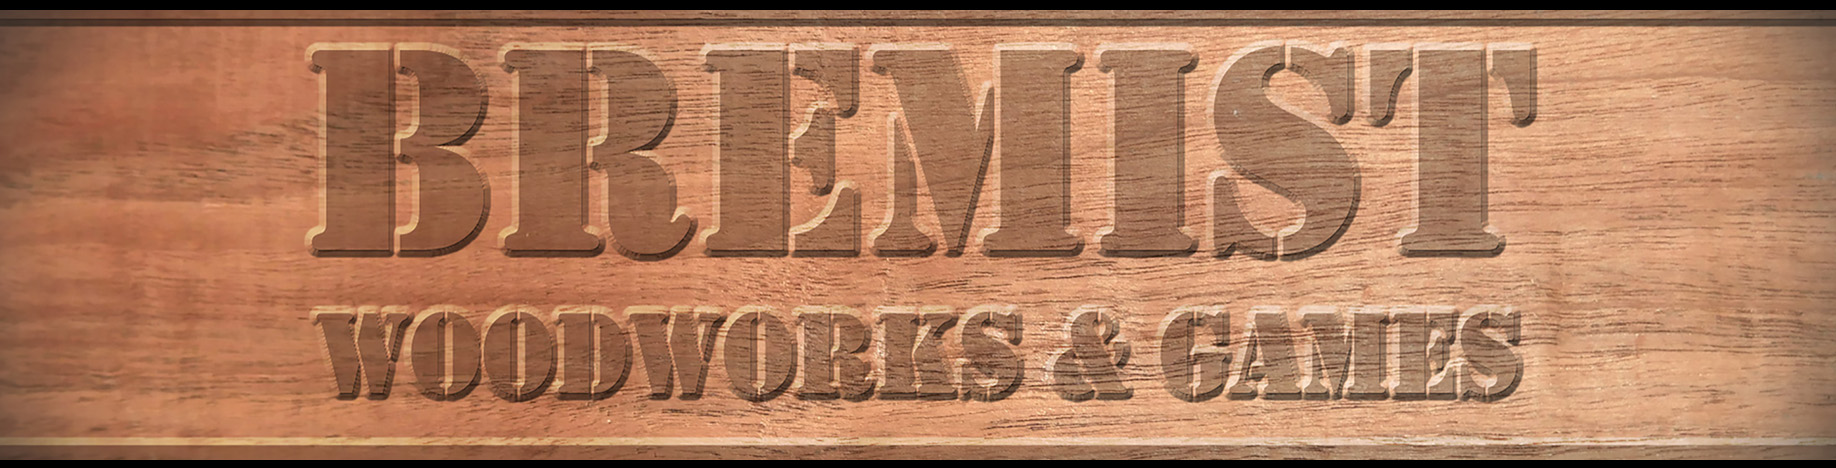 BreMiSt Woodworks and Games Title